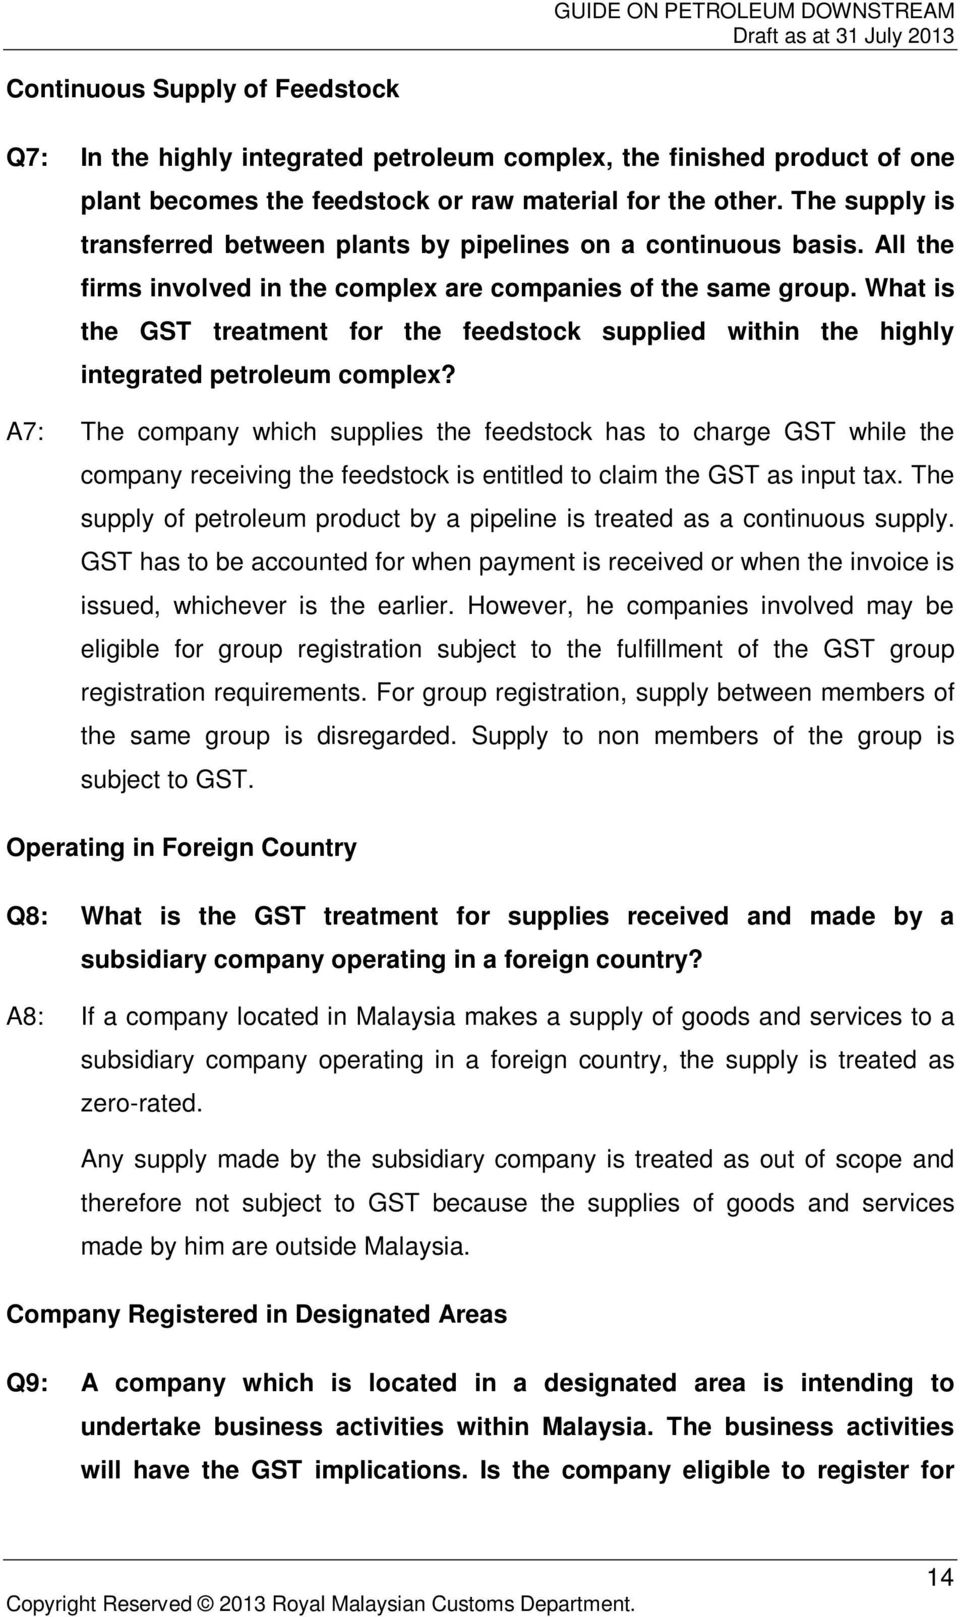 What is the GST treatment for the feedstock supplied within the highly integrated petroleum complex?